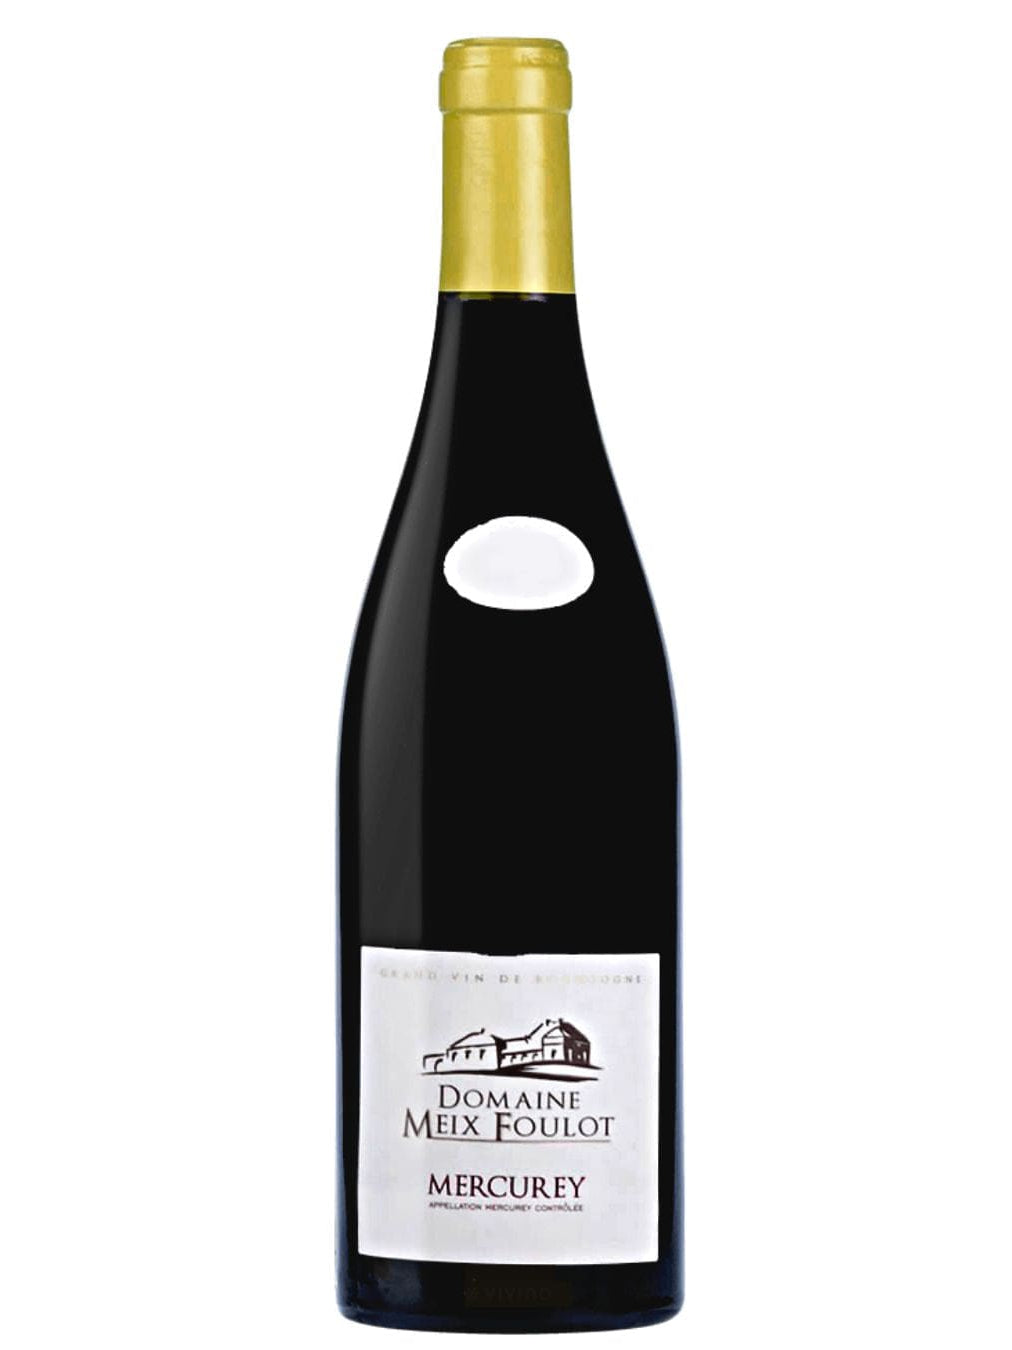 Shop Domaine Meix Foulot Domaine Meix Foulot Mercurey Rouge 2019 online at PENTICTON artisanal French wine store in Hong Kong. Discover other French wines, promotions, workshops and featured offers at pentictonpacific.com 